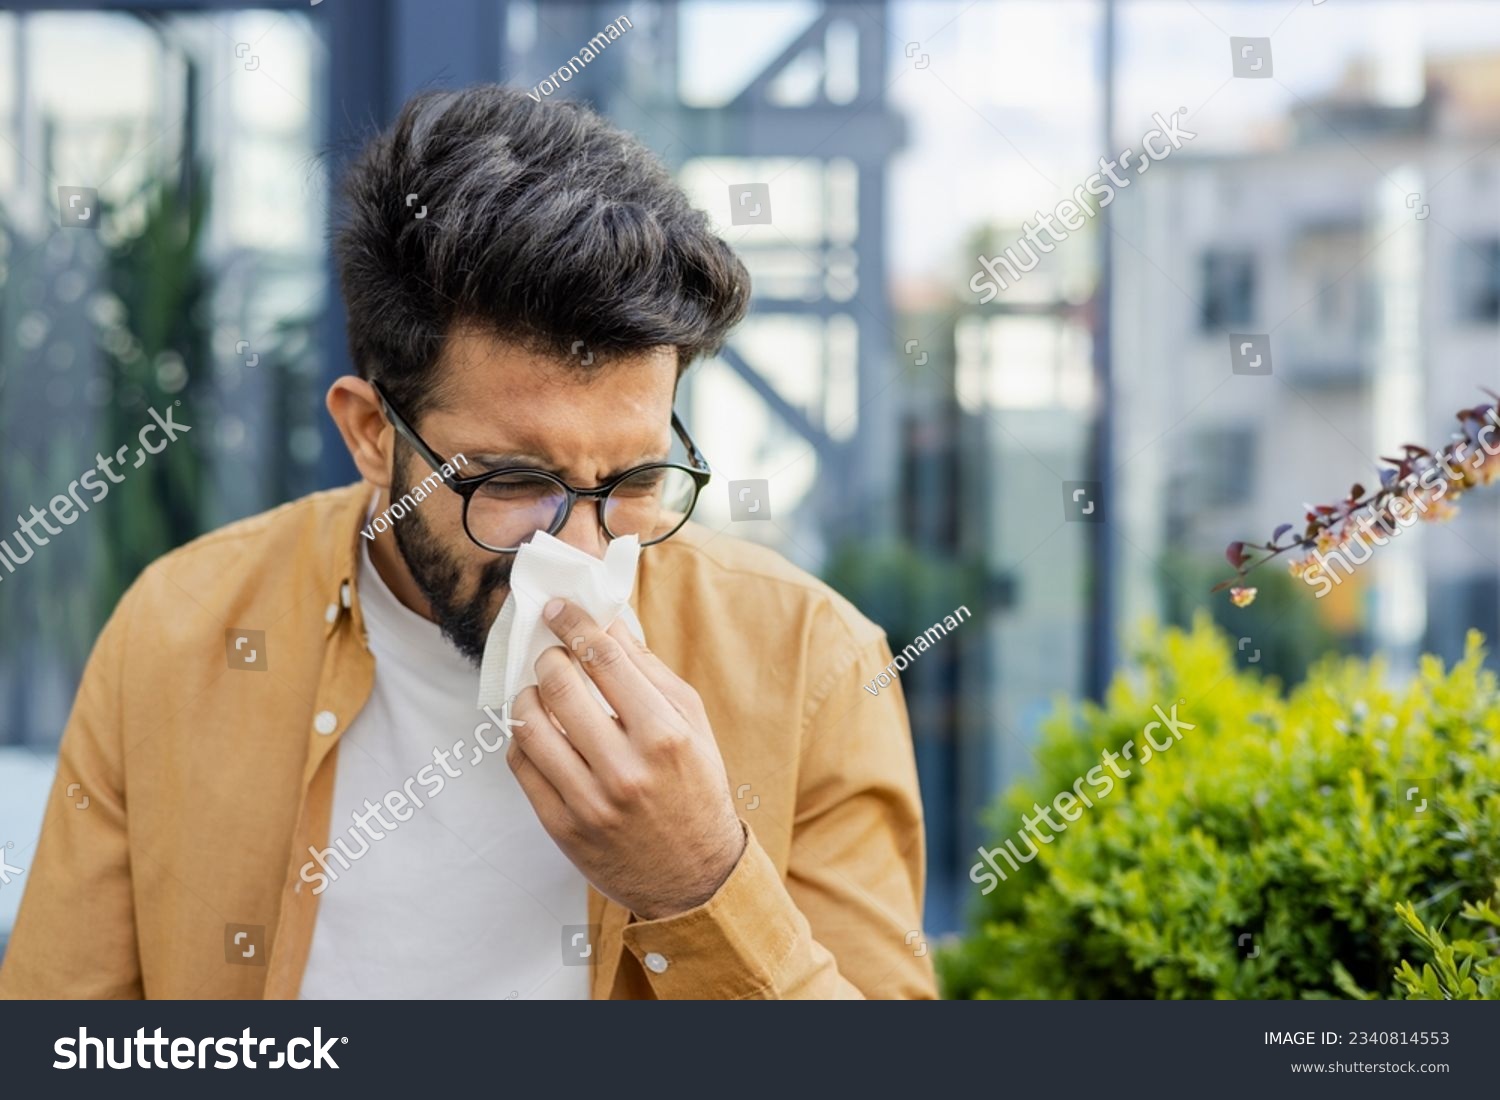 Young man sneezing and having a runny nose allergy sitting on a bench in the daytime outside an office building, hispanic businessman sick with a tissue near his nose. #2340814553